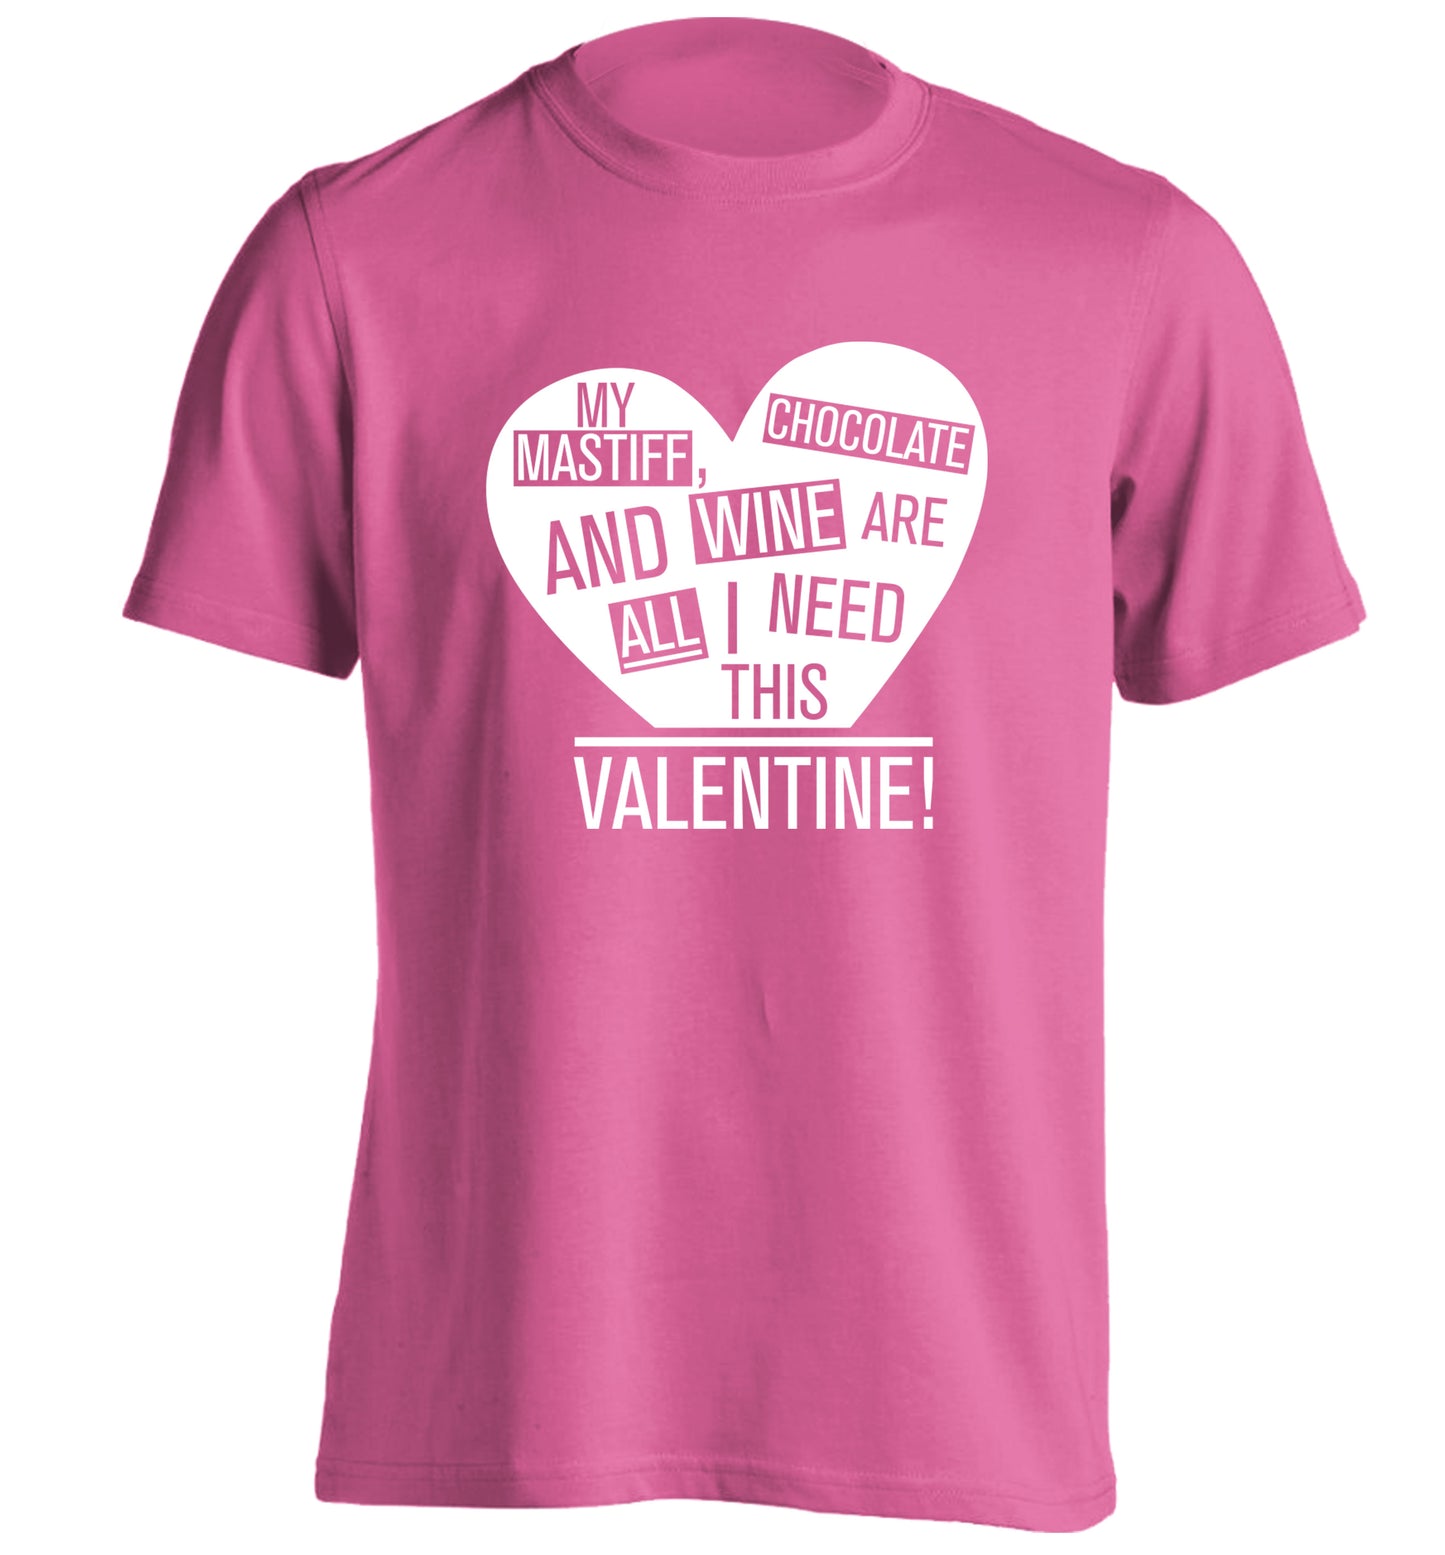 My mastiff, chocolate and wine are all I need this valentine! adults unisex pink Tshirt 2XL